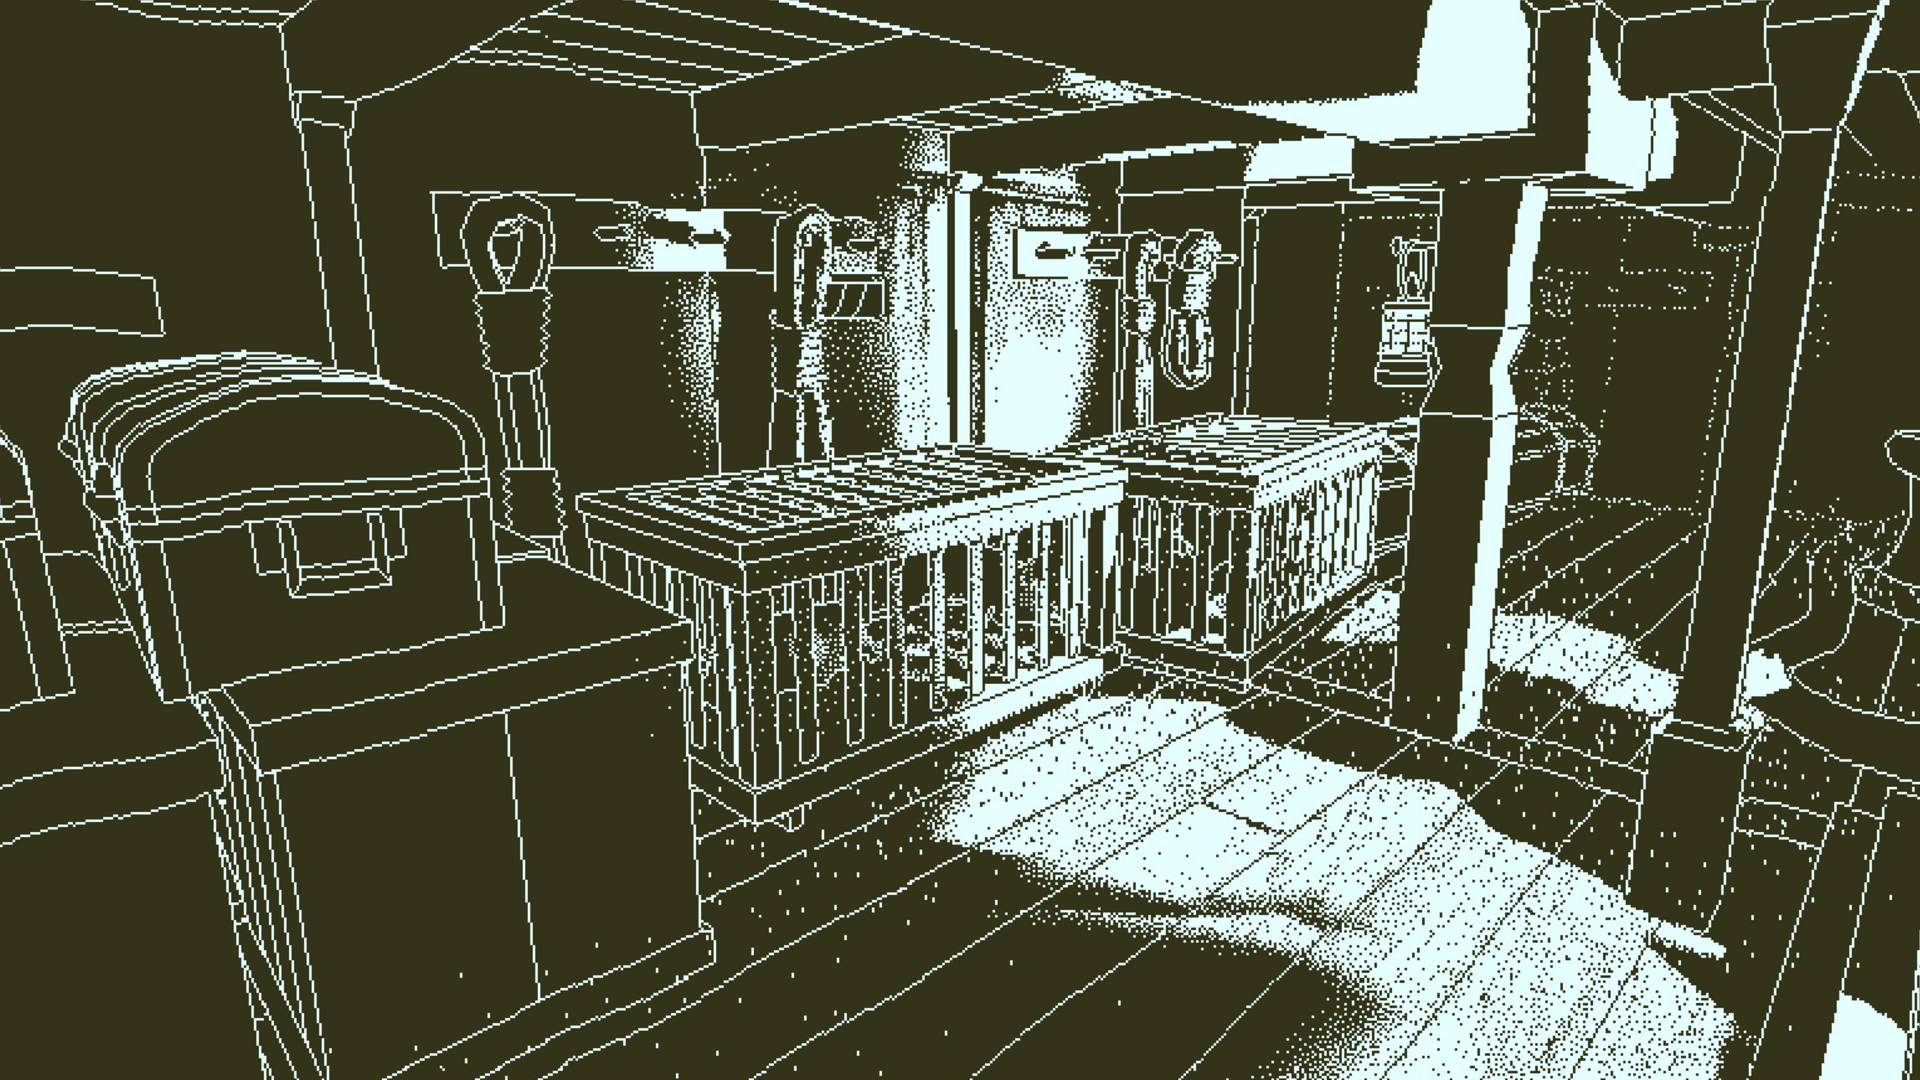 Best retro games: Return of the Obra Dinn. Image shows a dark cabin within a ship.